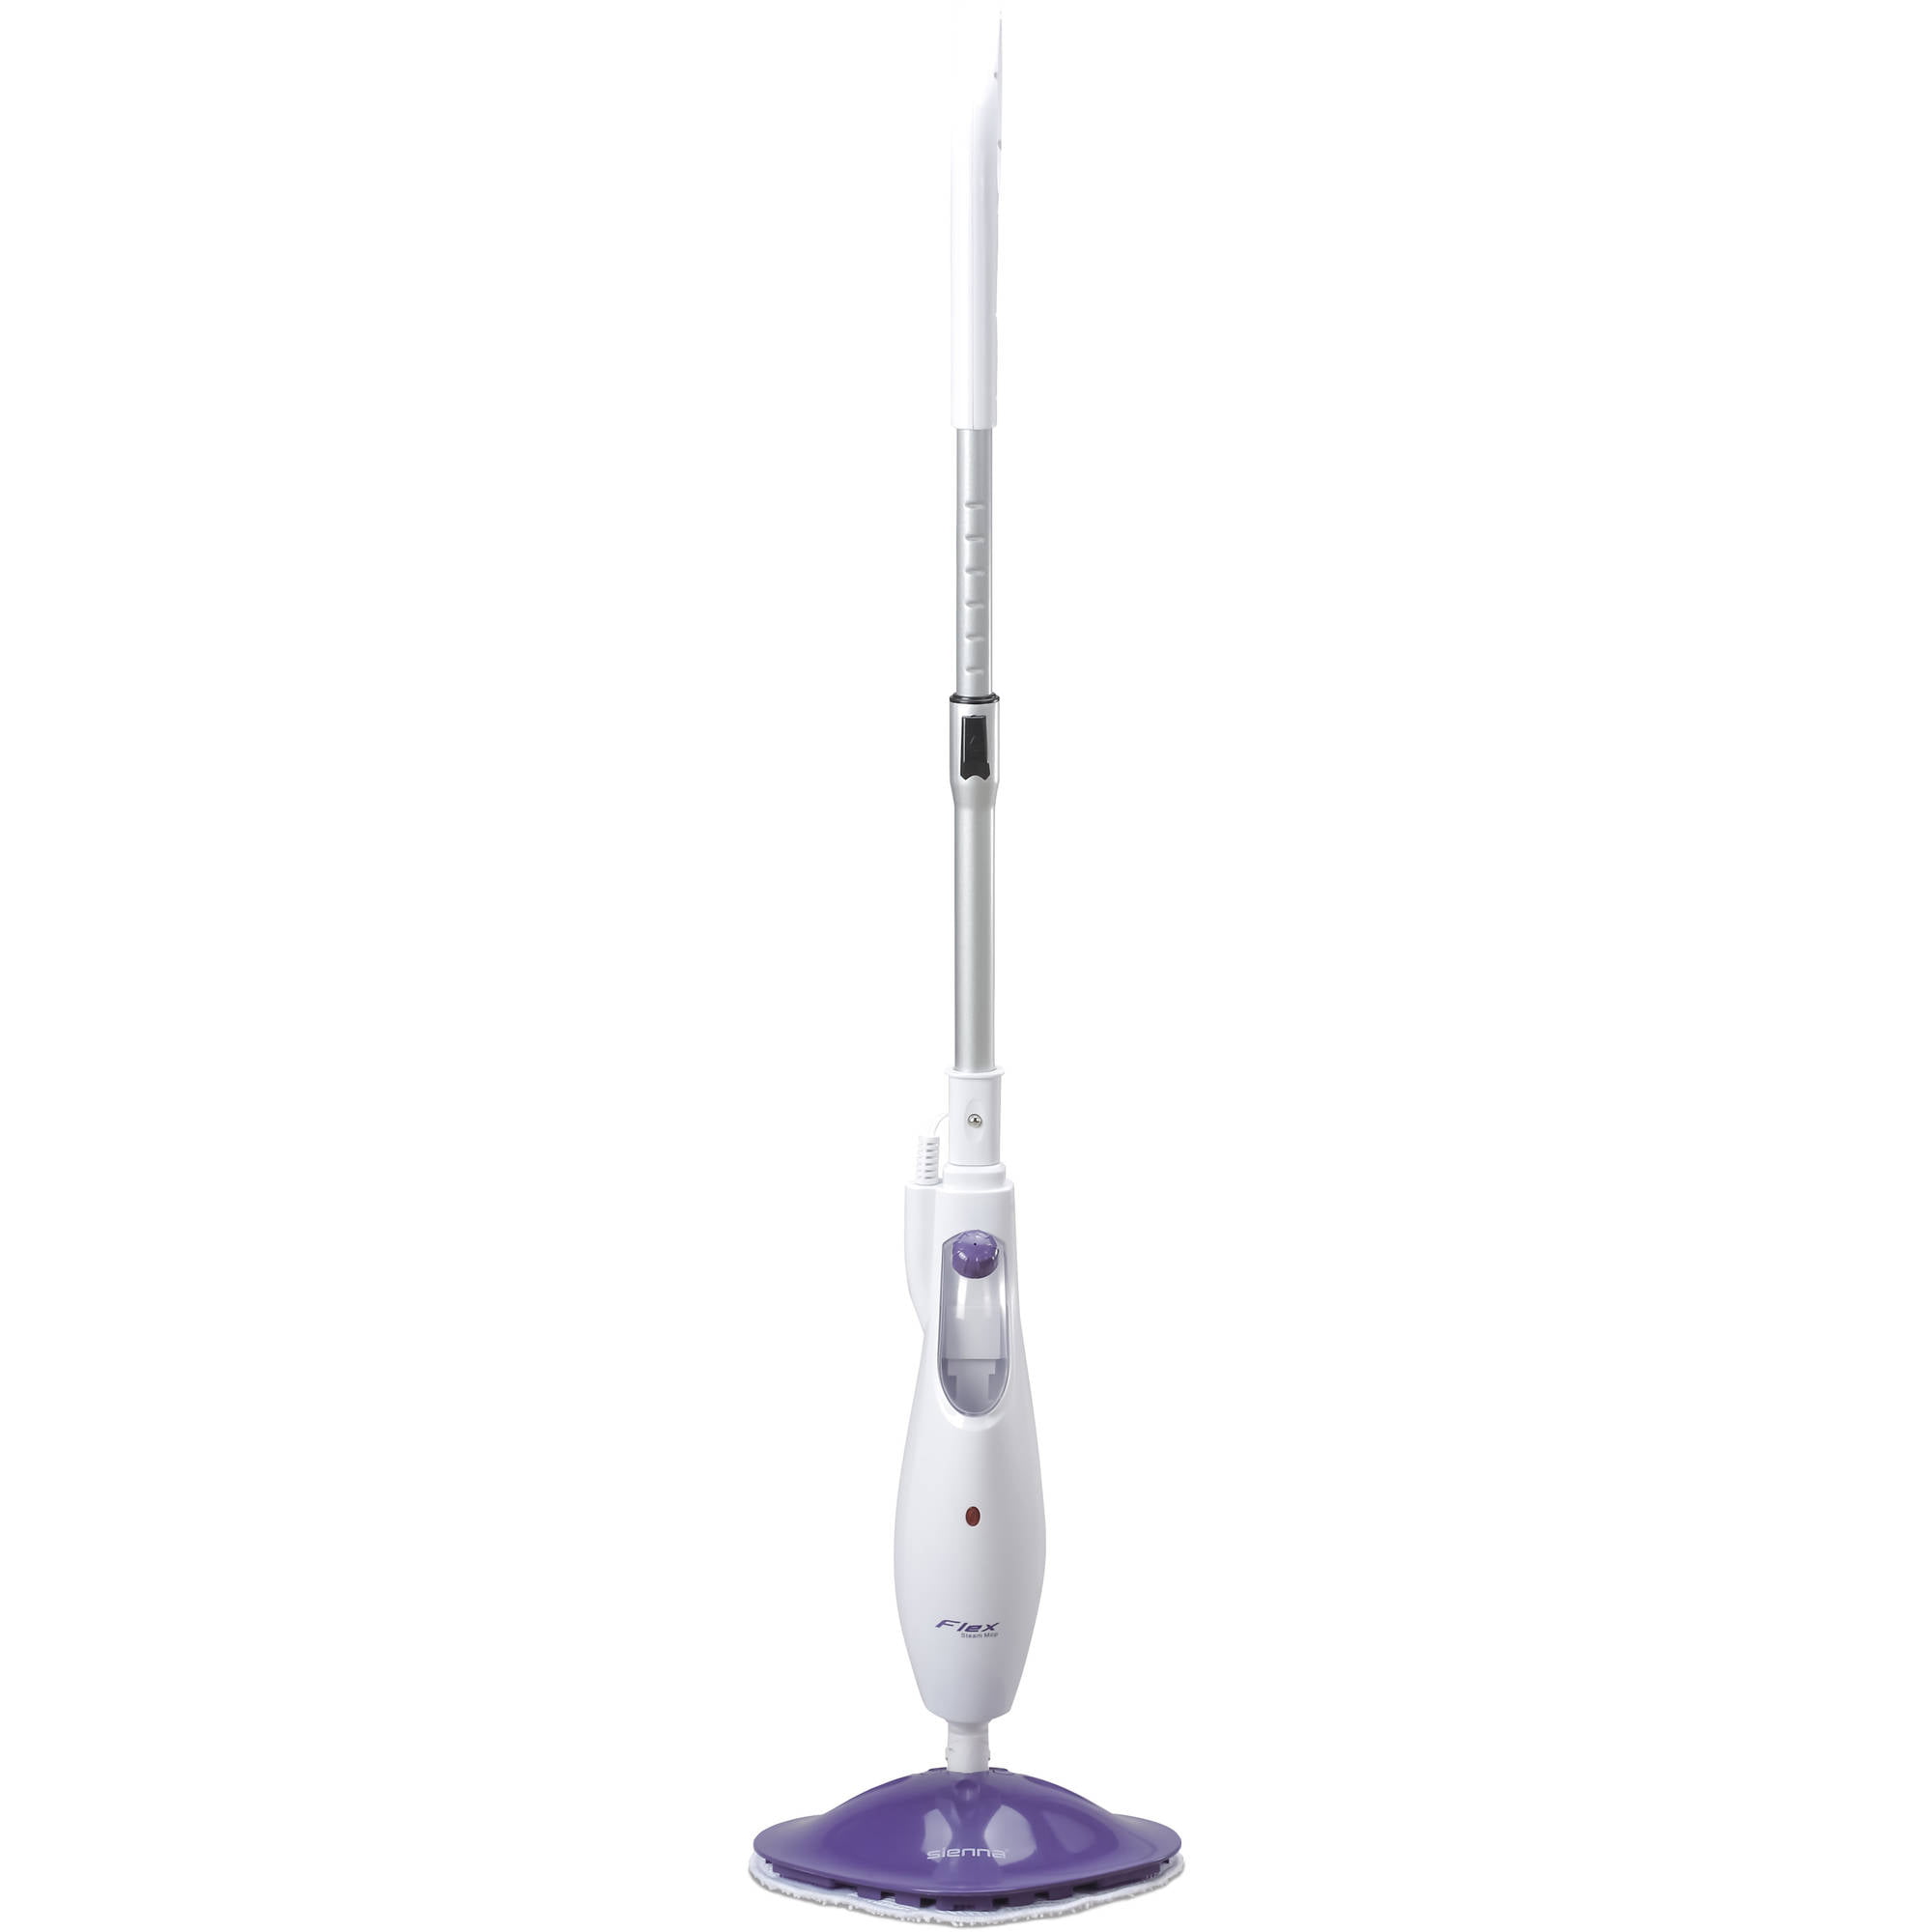 Sienna FLEX Steam Mop and Steam Cleaner Superheated Vapor Kills Bacteria and Sanitizes Adjustable Height Pocket Mop with 2 Washable Microfiber Cleaning Pads 